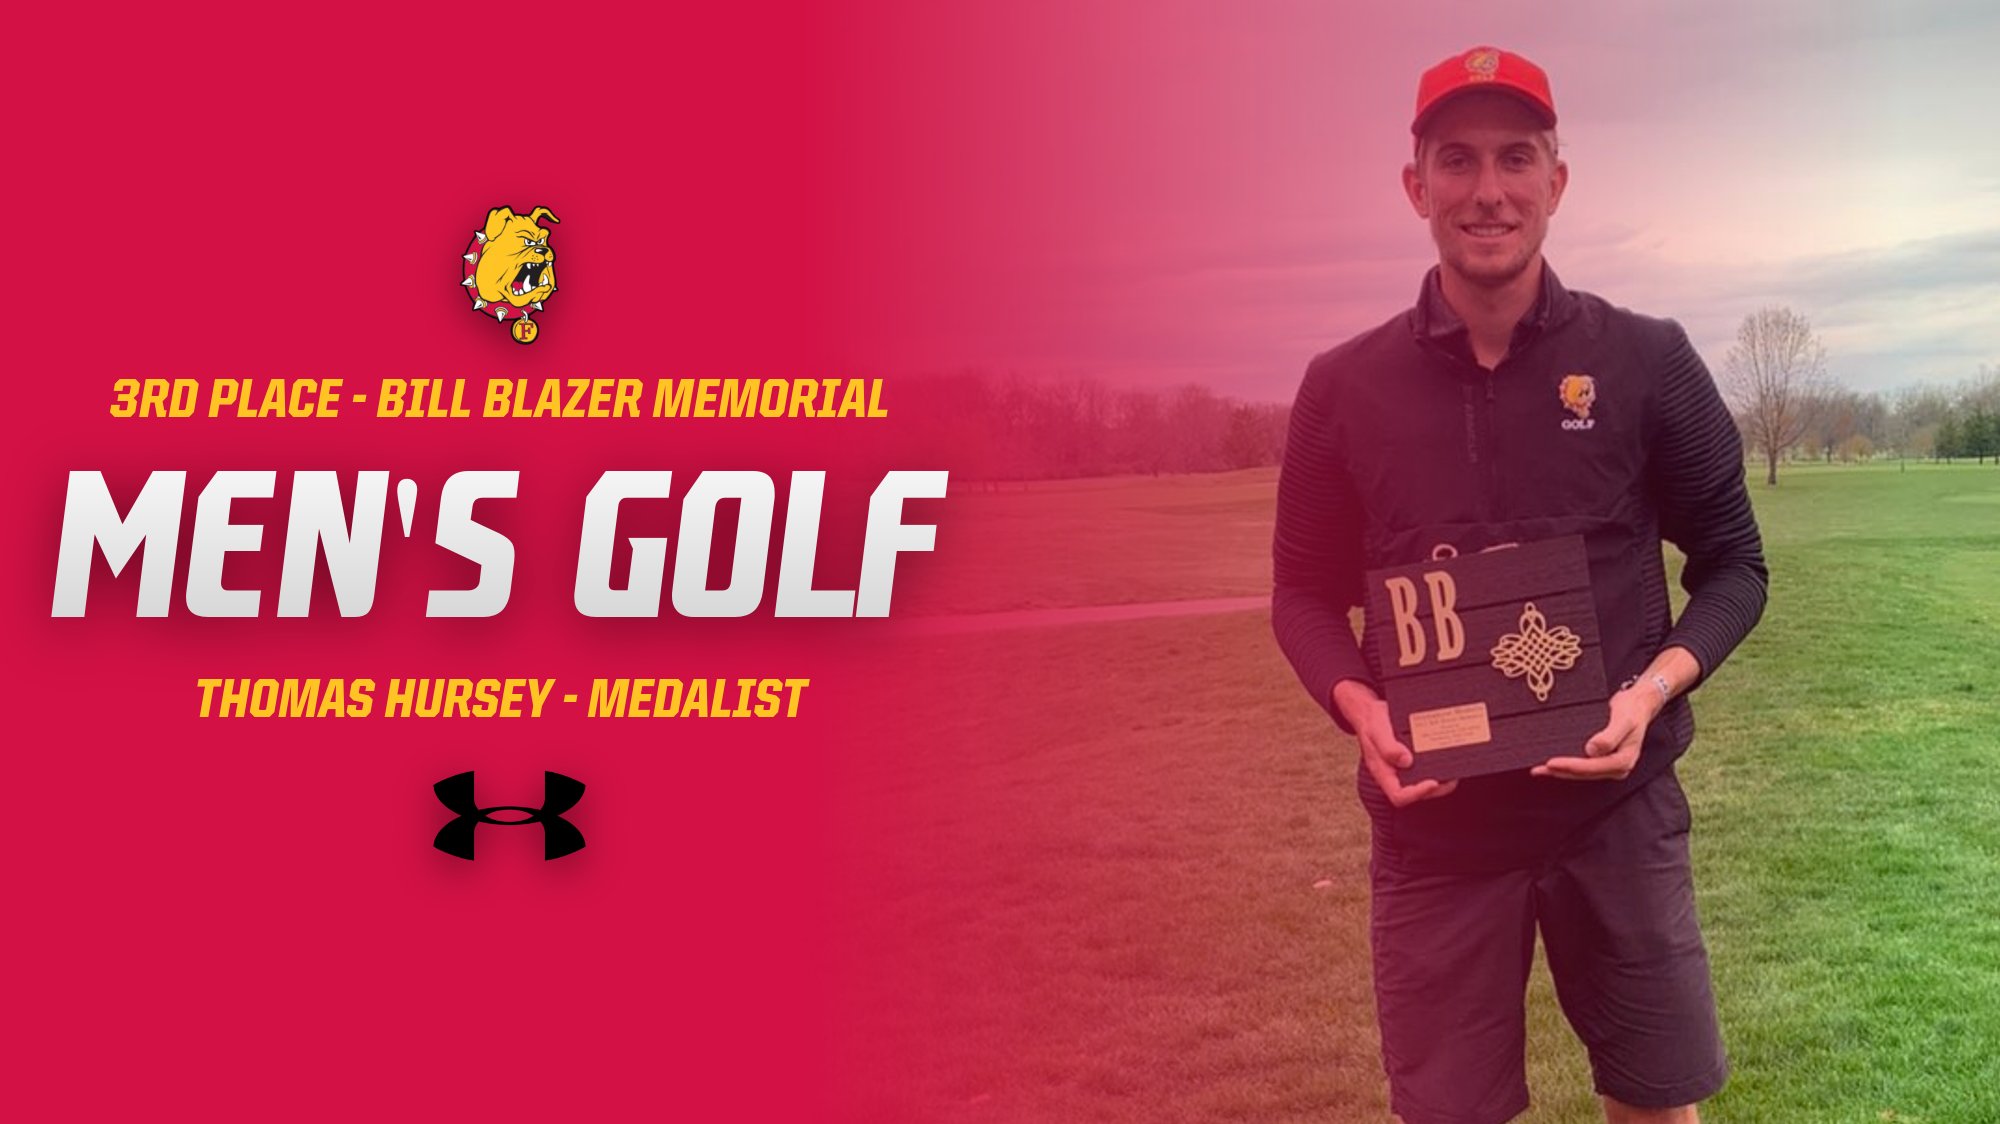 Ferris State Men's Golf Finishes Third As Hursey Wins Second-Straight Medalist Honor